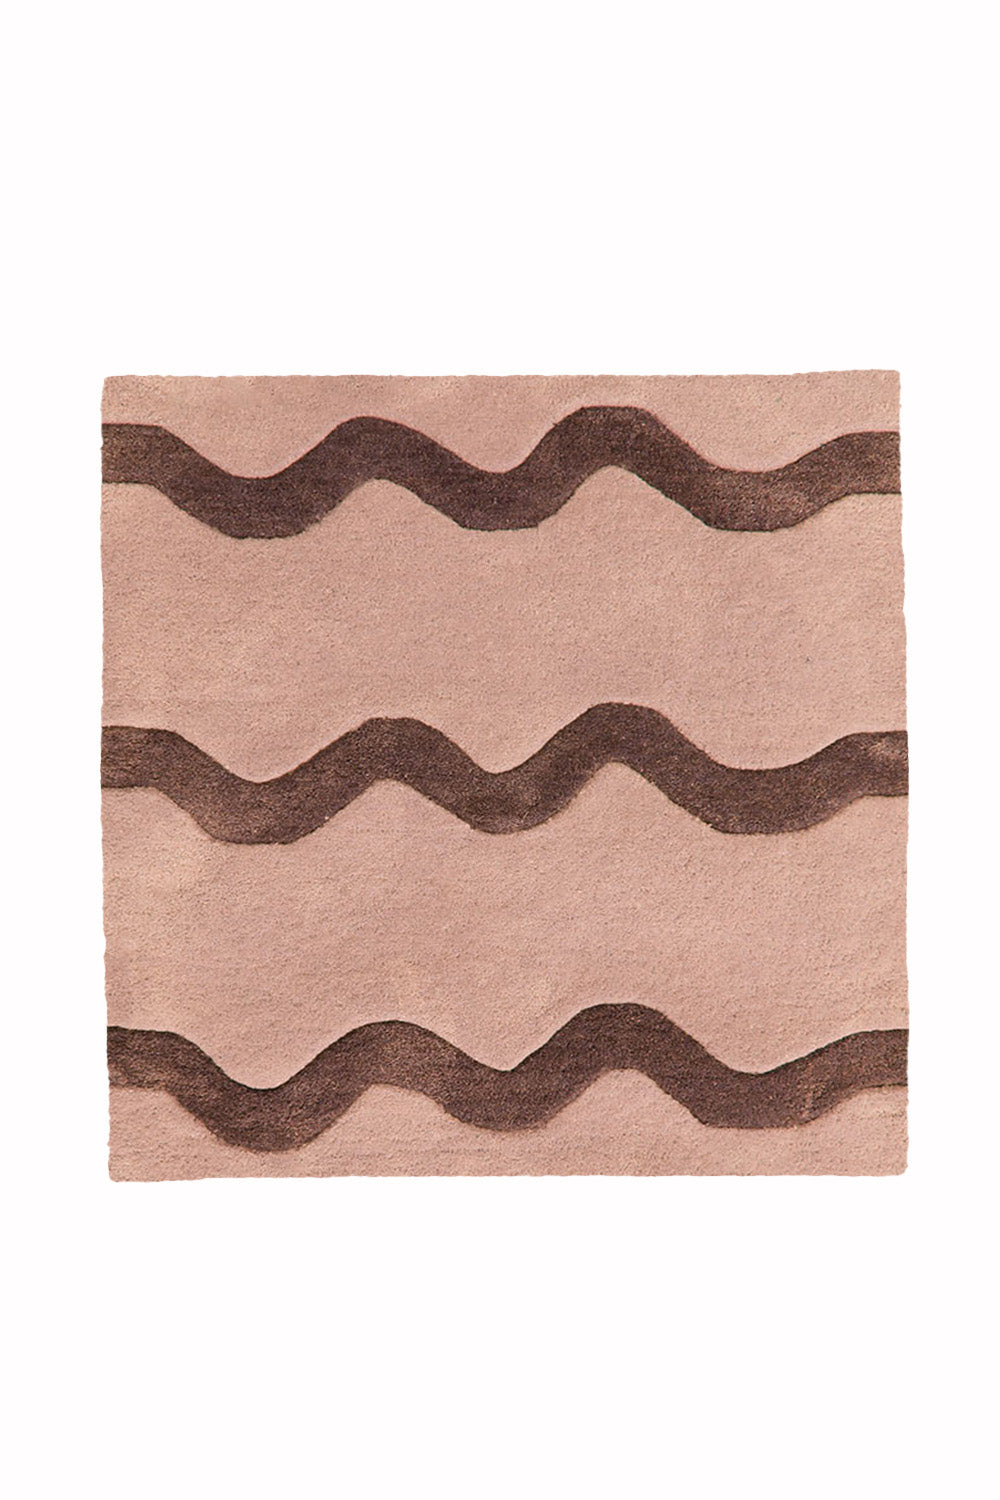 Squiggly Square Hand Tufted Wool Rug by JUBI